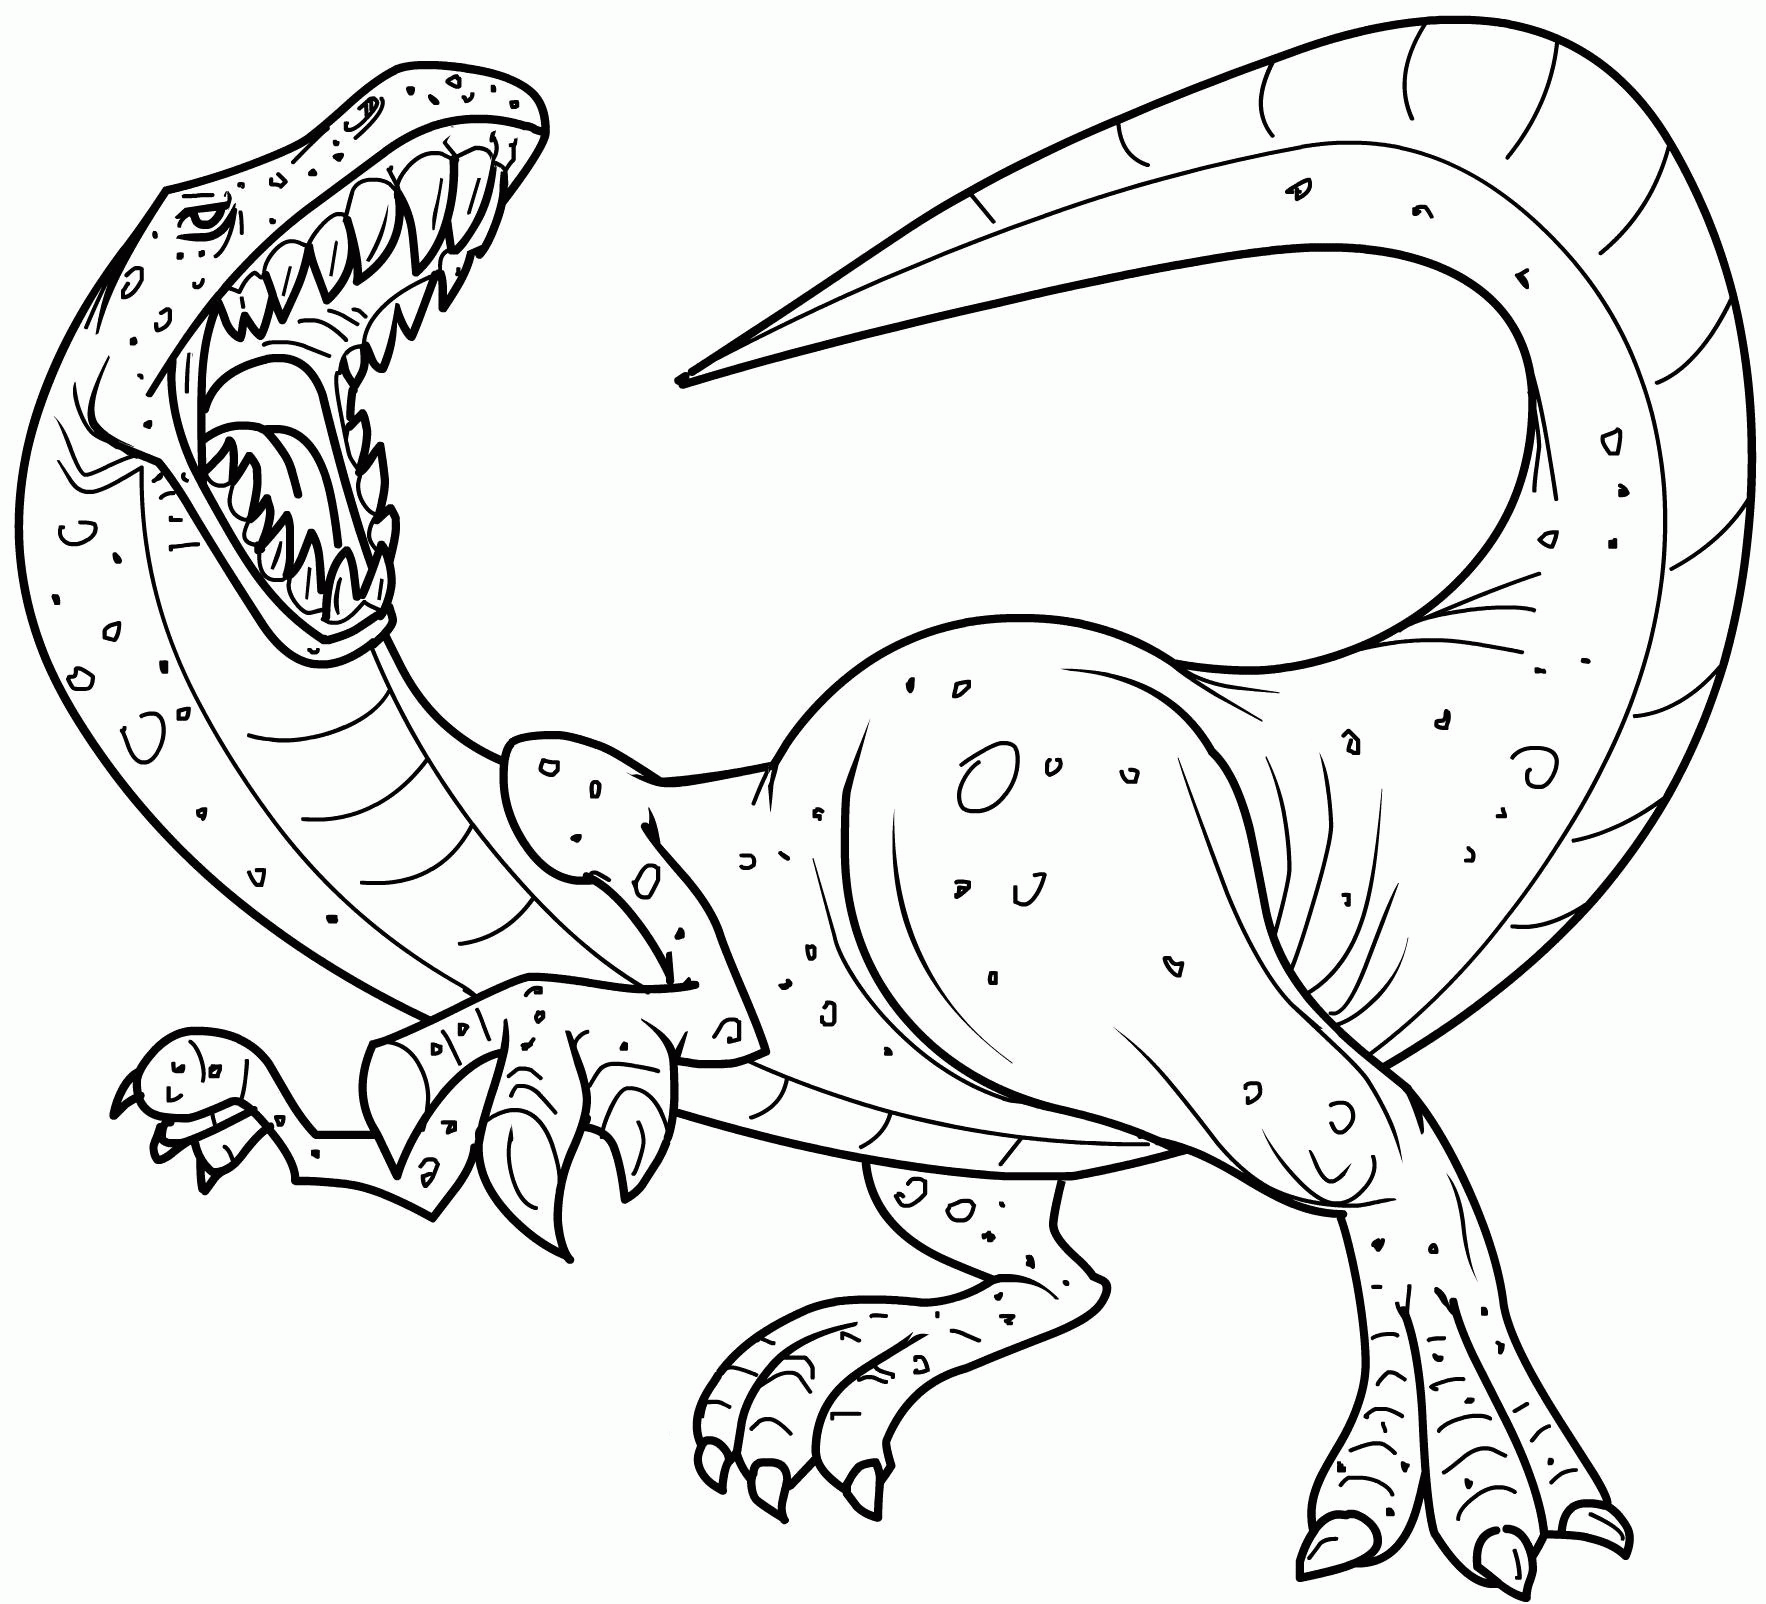 Dinosaur Coloring Pages For Kids Printable. Top 20 Free Printable ...